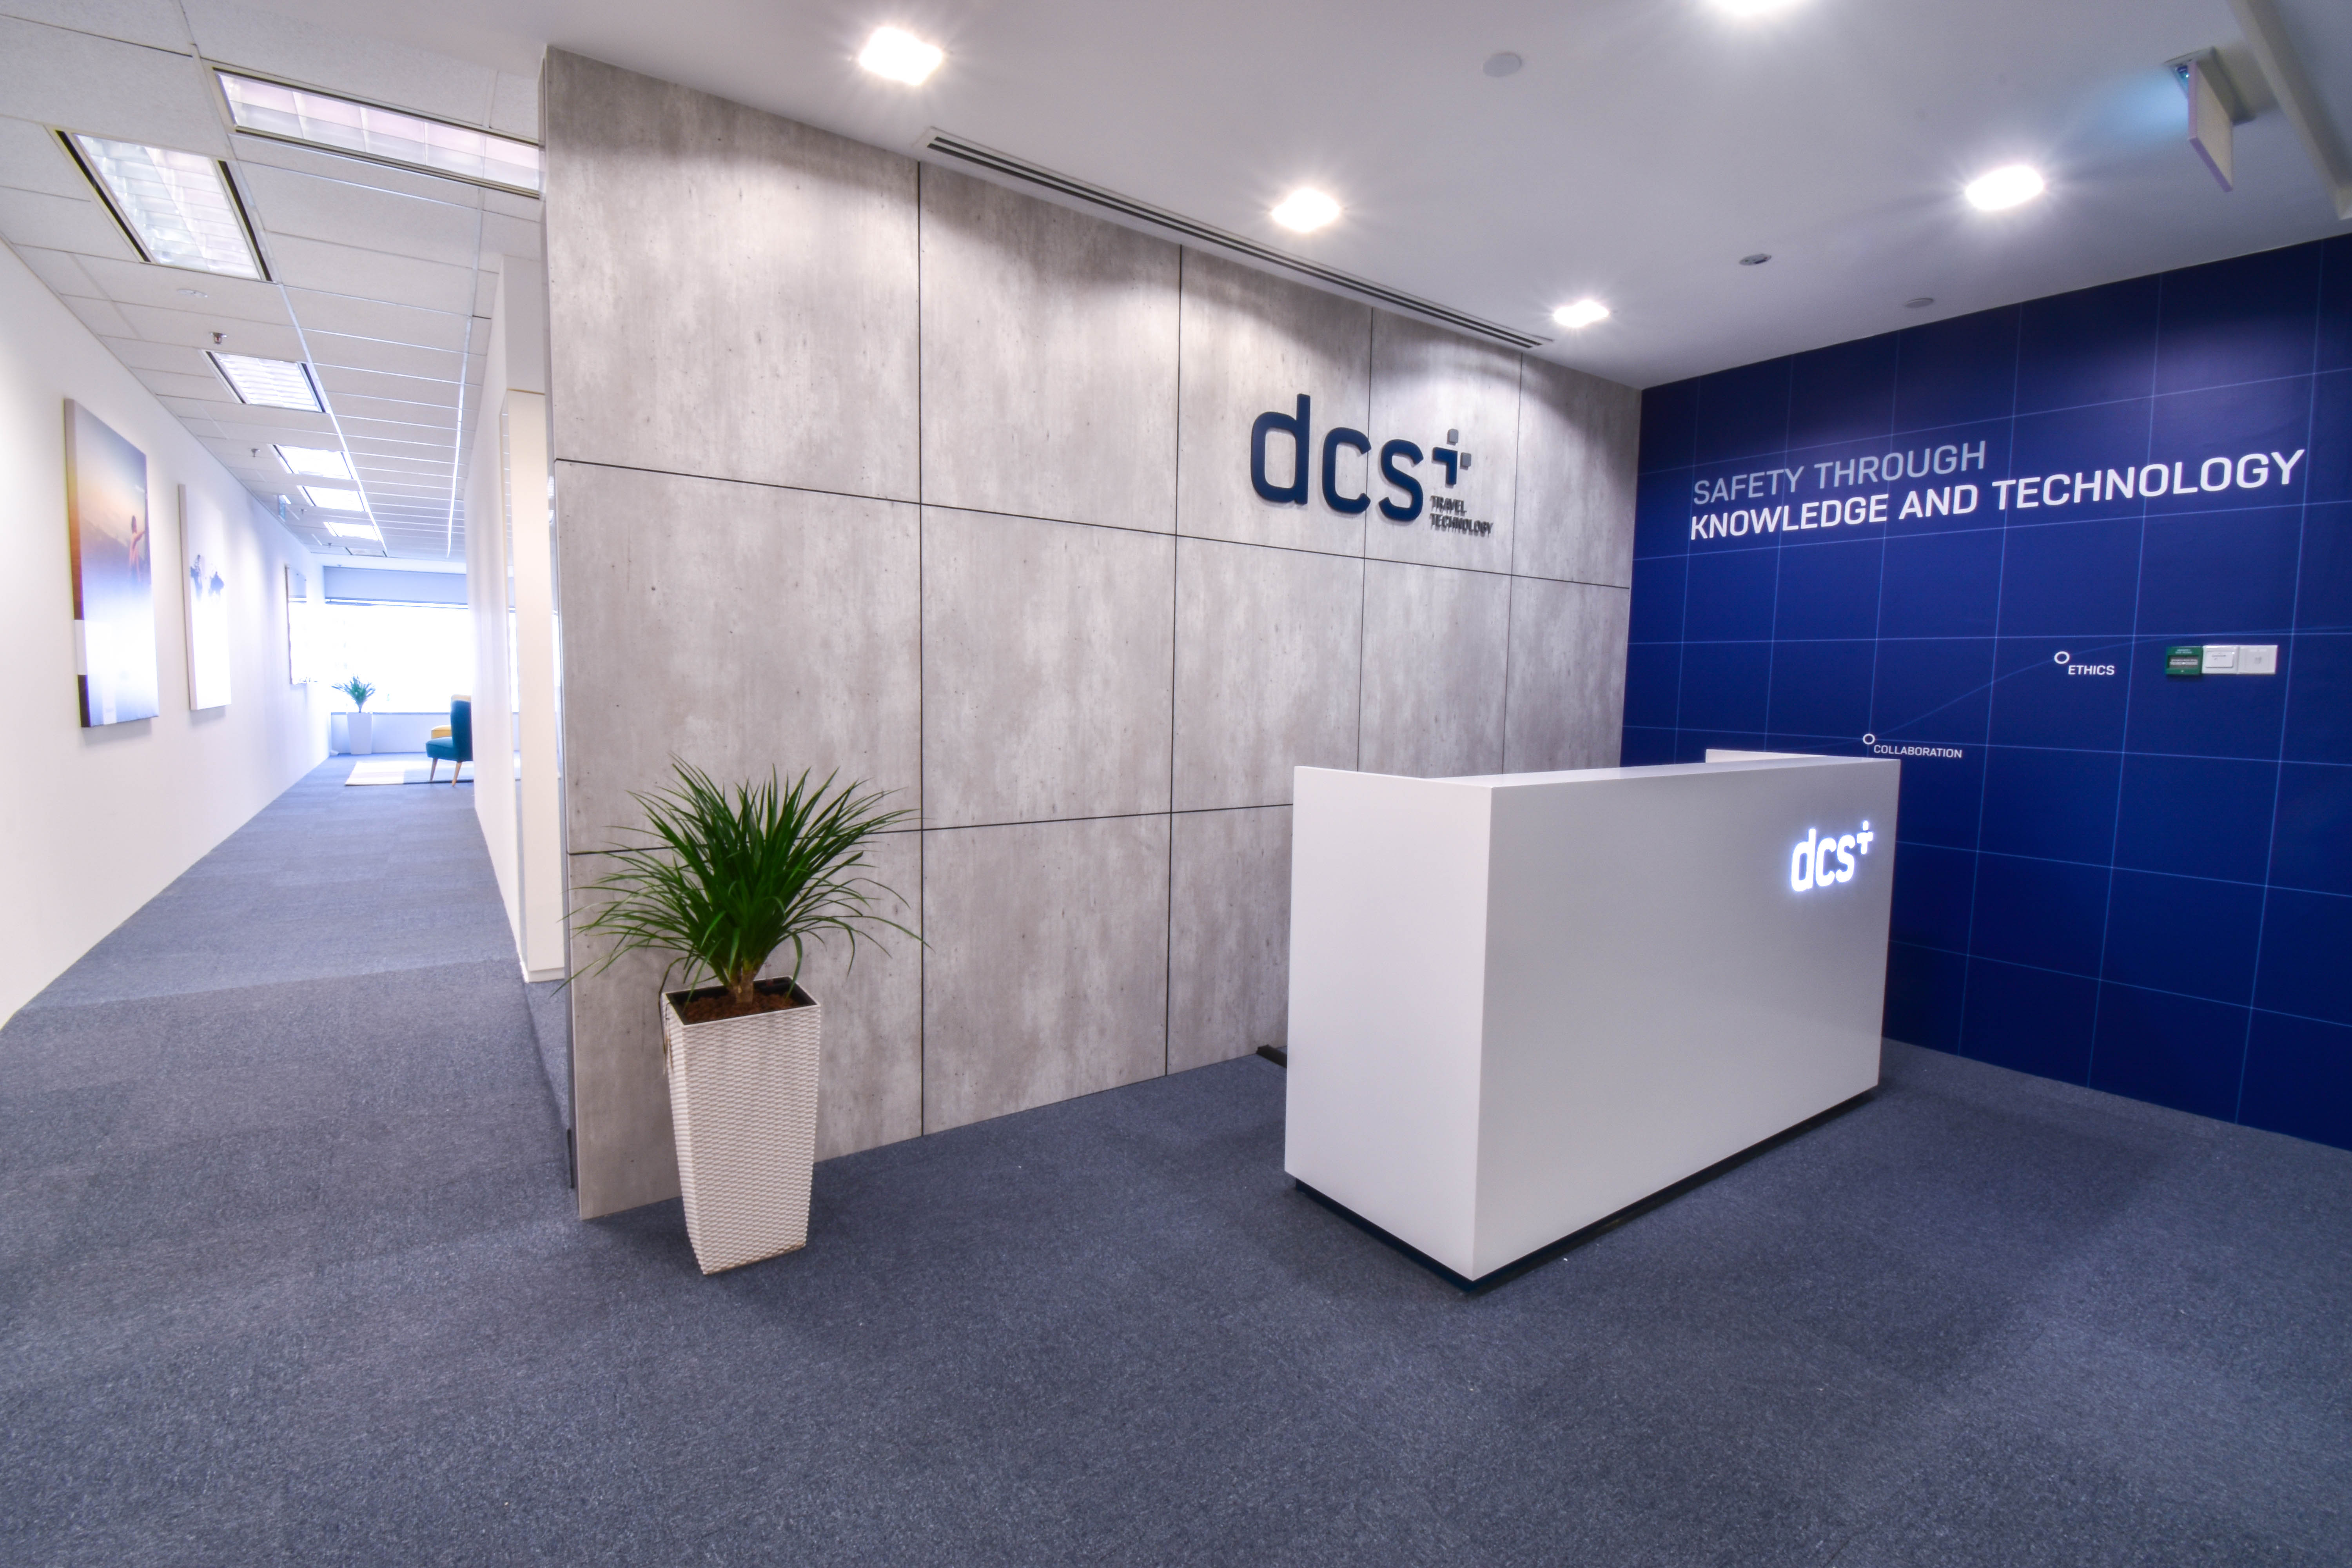 dcs plus expands its reach in APAC with a new office in Singapore